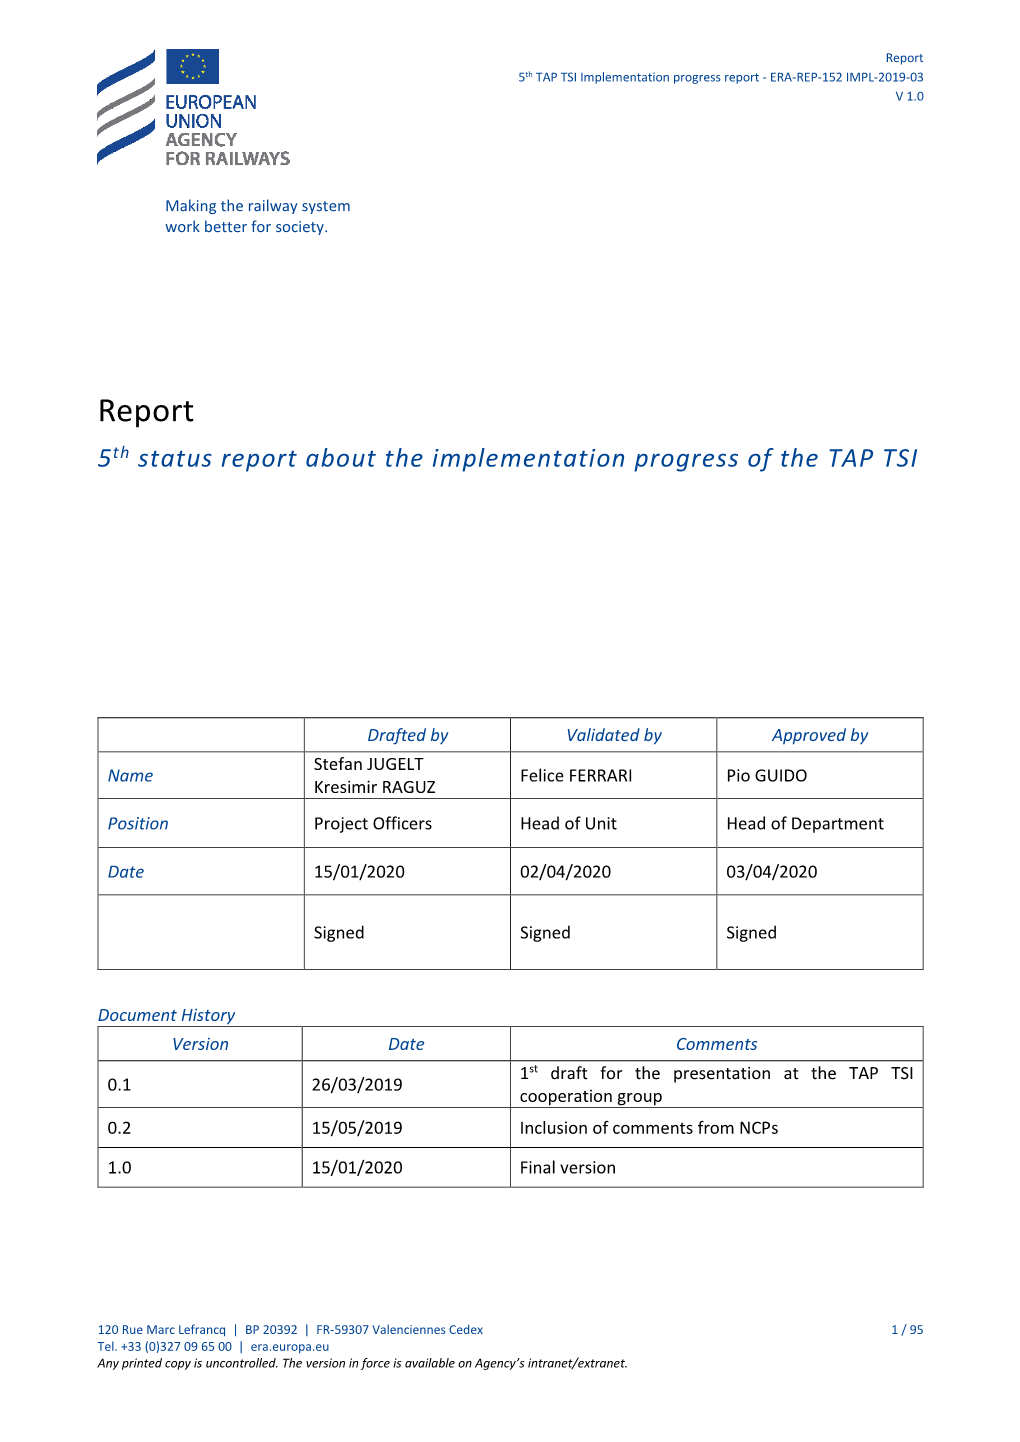 5Th Status Report About the Implementation Progress of the TAP TSI